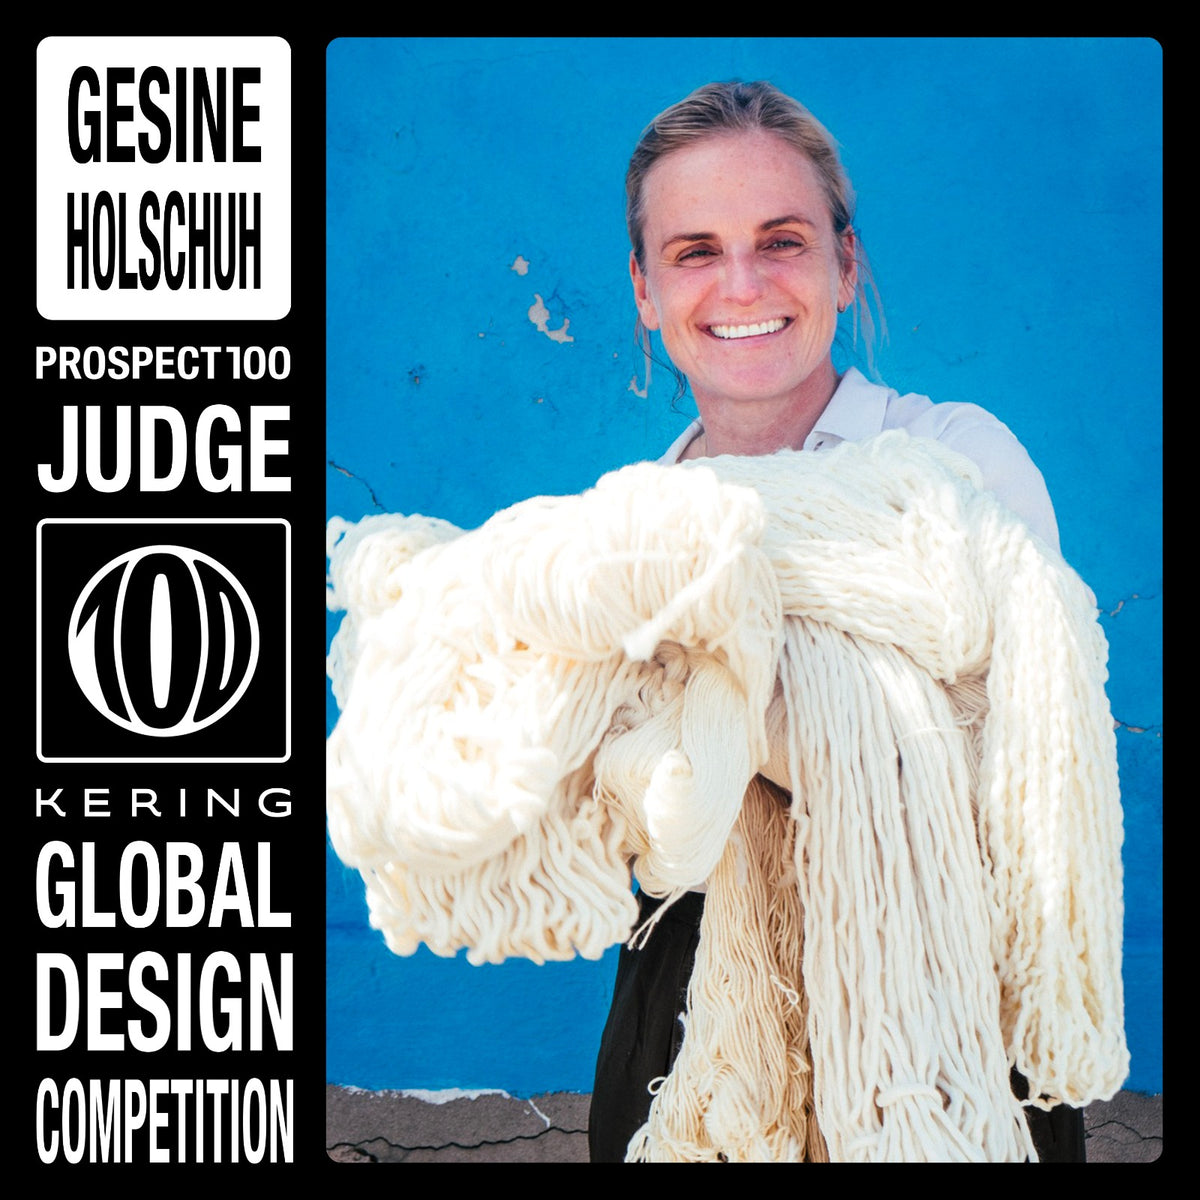 Gesine Member of judging panel Kering - Prospect 100 Competition